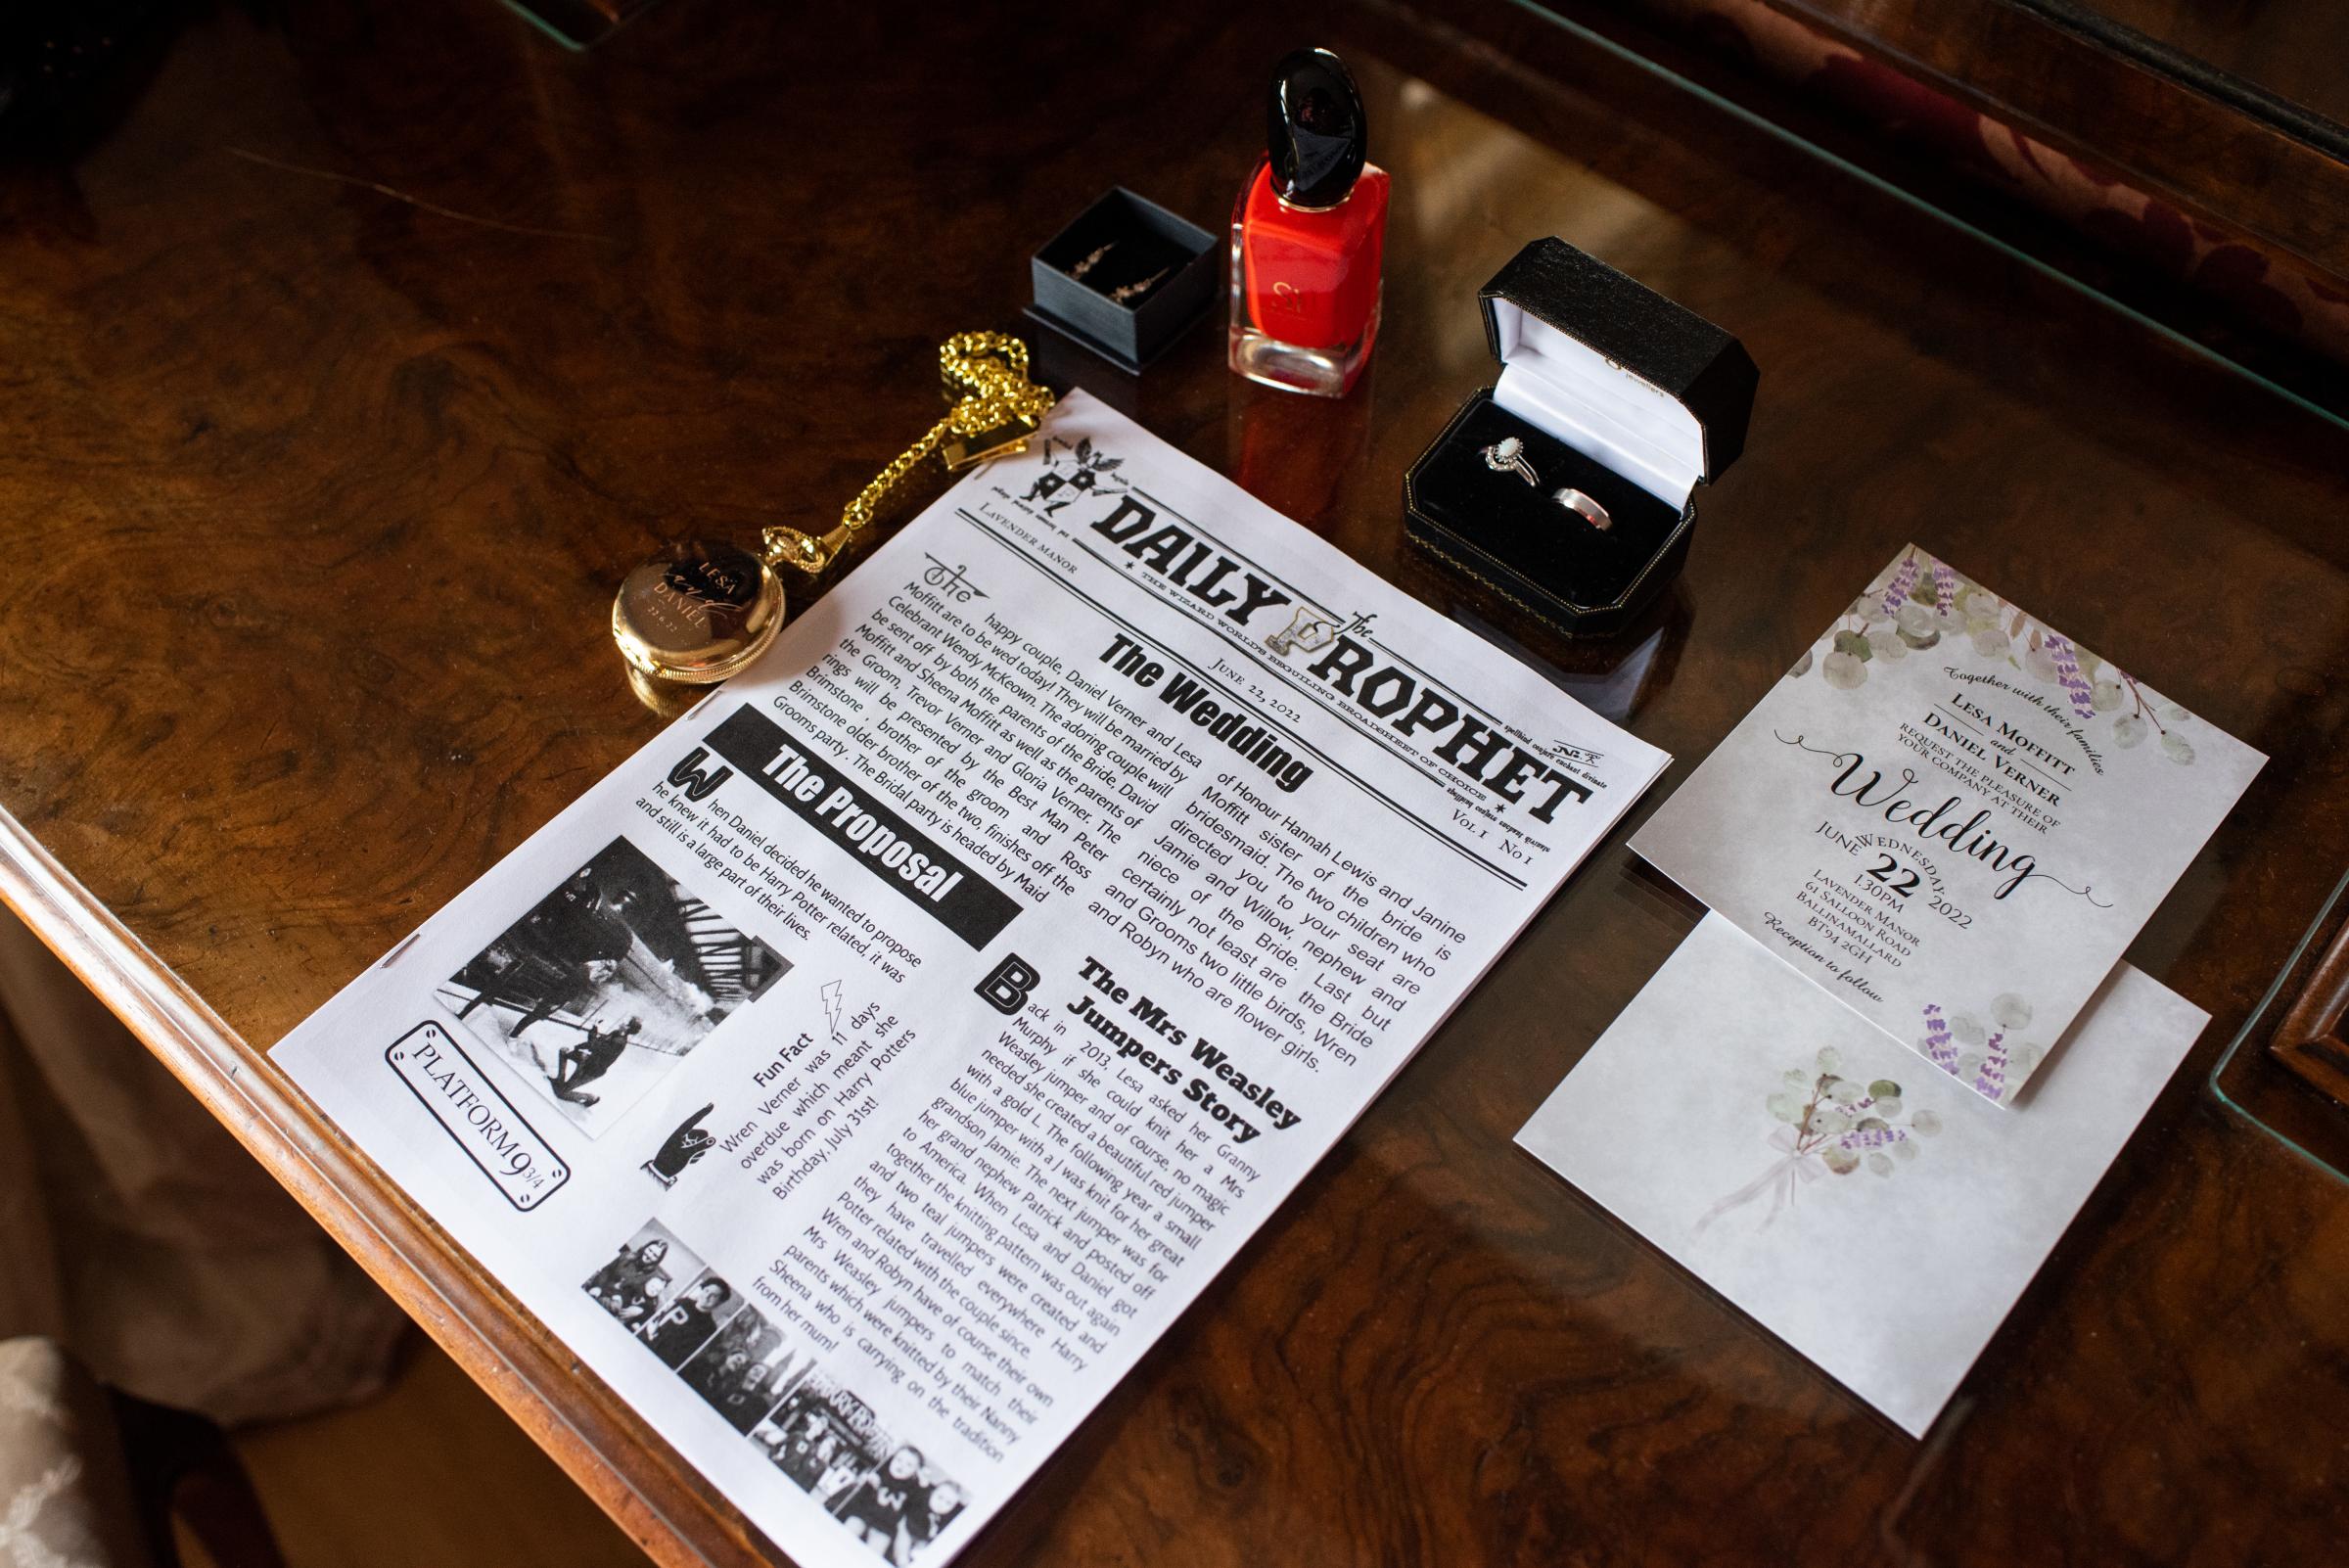 Lesa and Daniels personalised edition of the Daily Prophet, the newspaper from Harry Potter. Photo: Erica Irvine.